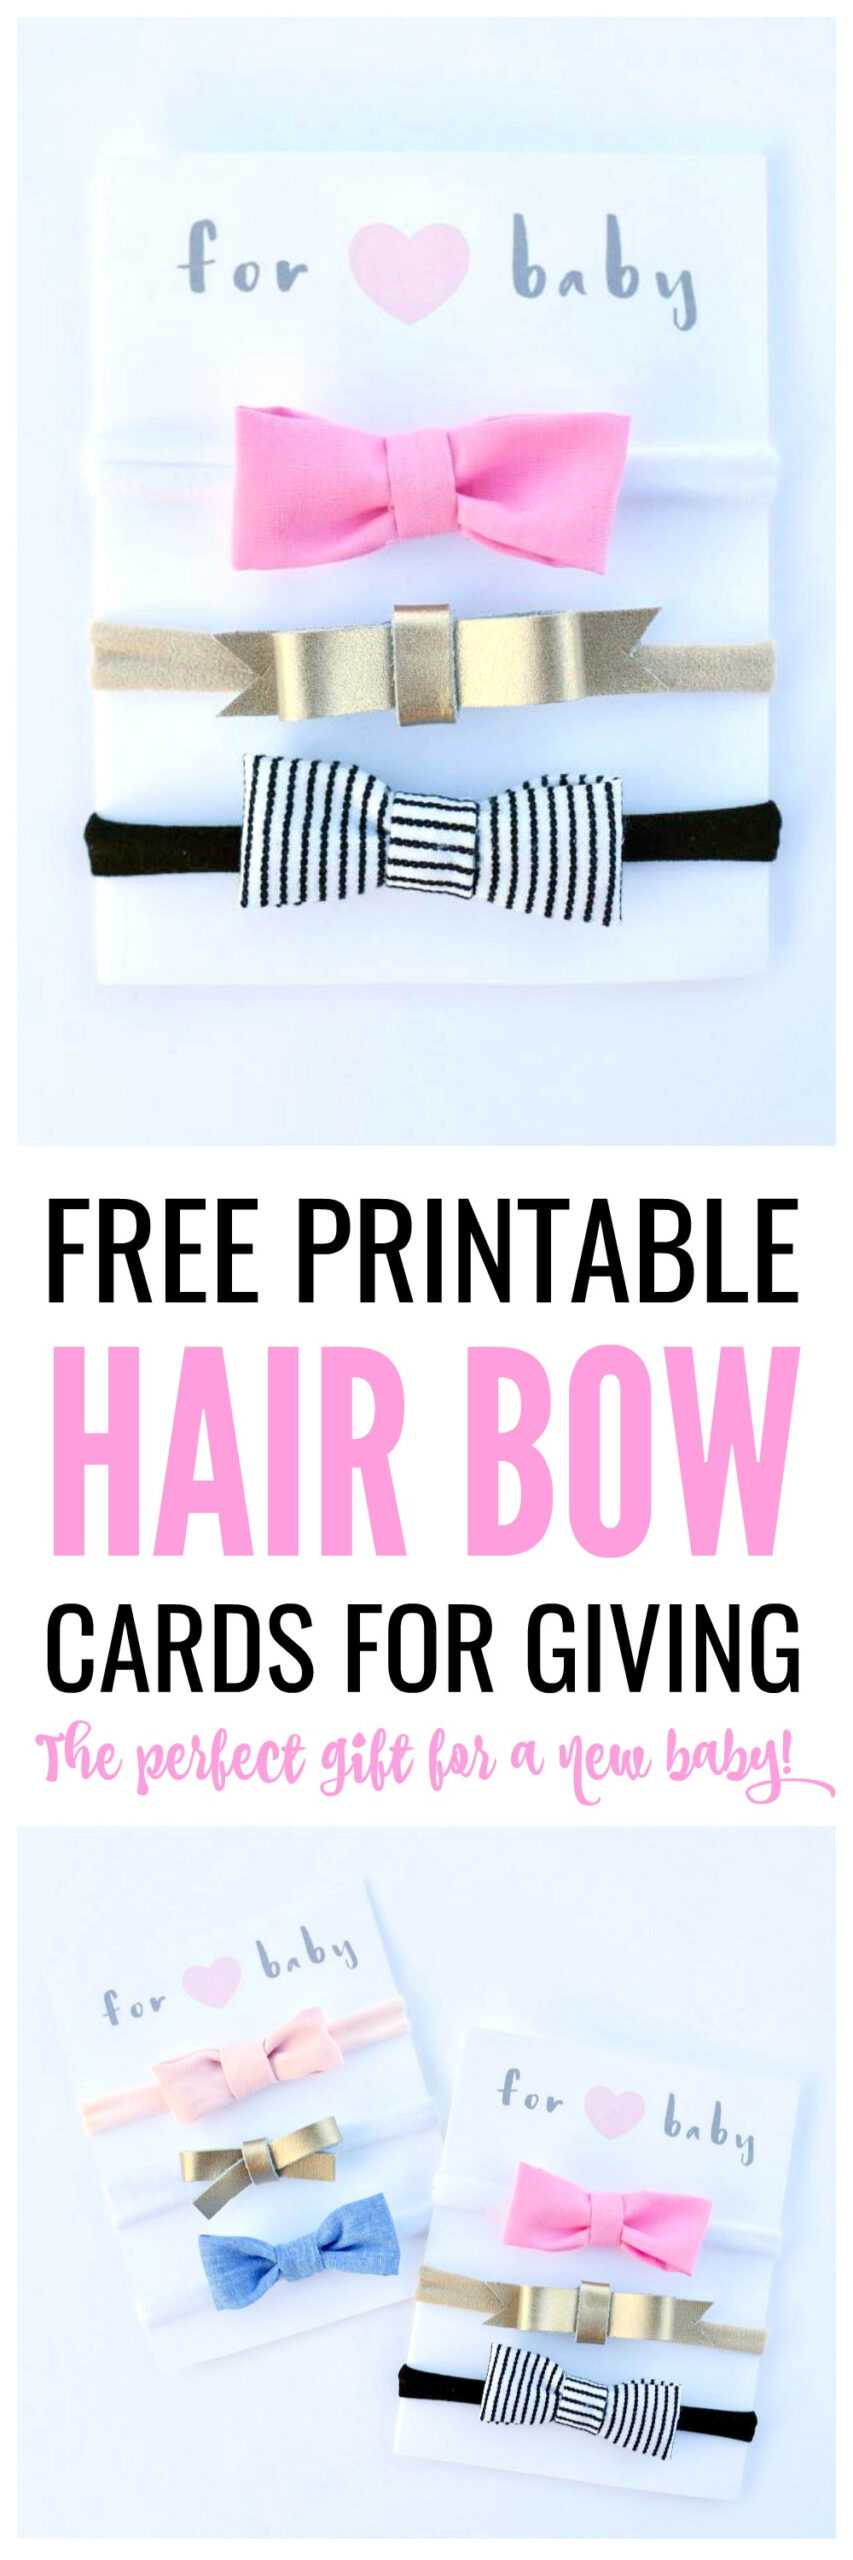 Free Printable Hair Bow Cards For Diy Hair Bows And Throughout Headband Card Template